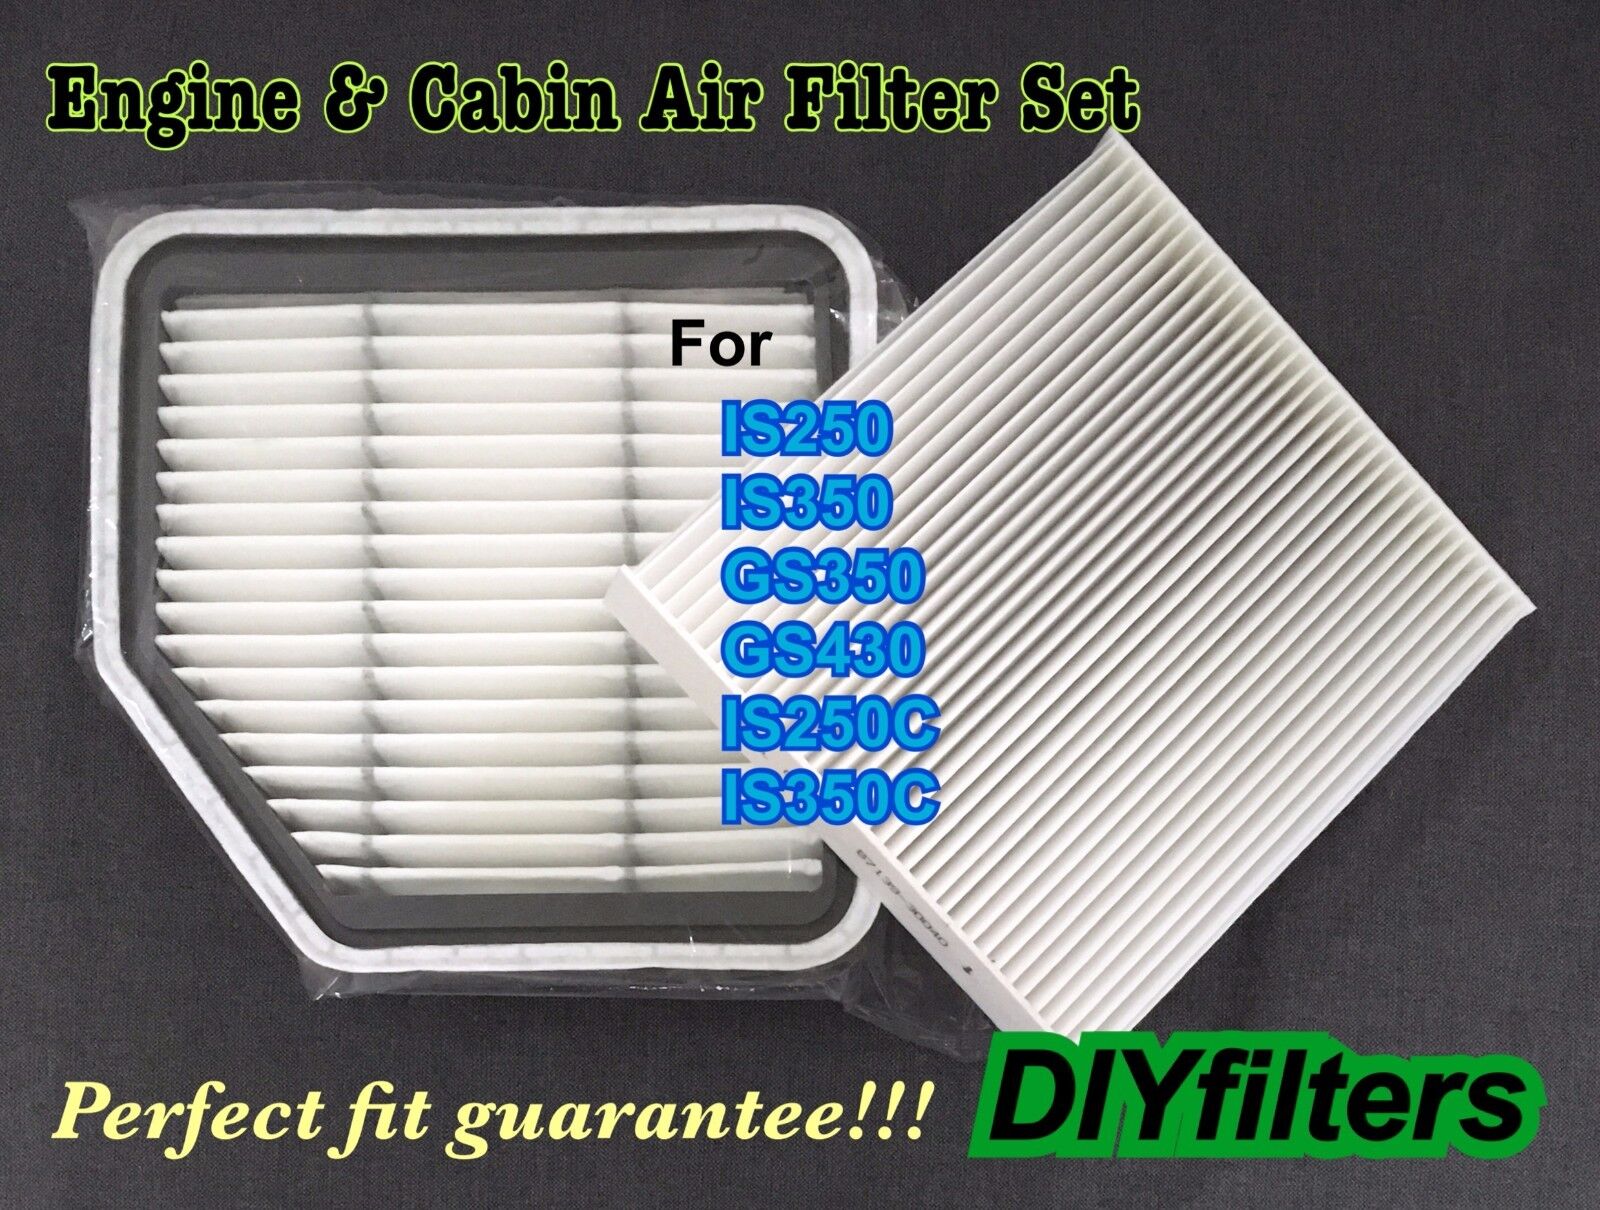 Engine & Cabin Air Filter For Lexus IS250 IS350 GS350 GS430 IS250C IS350C